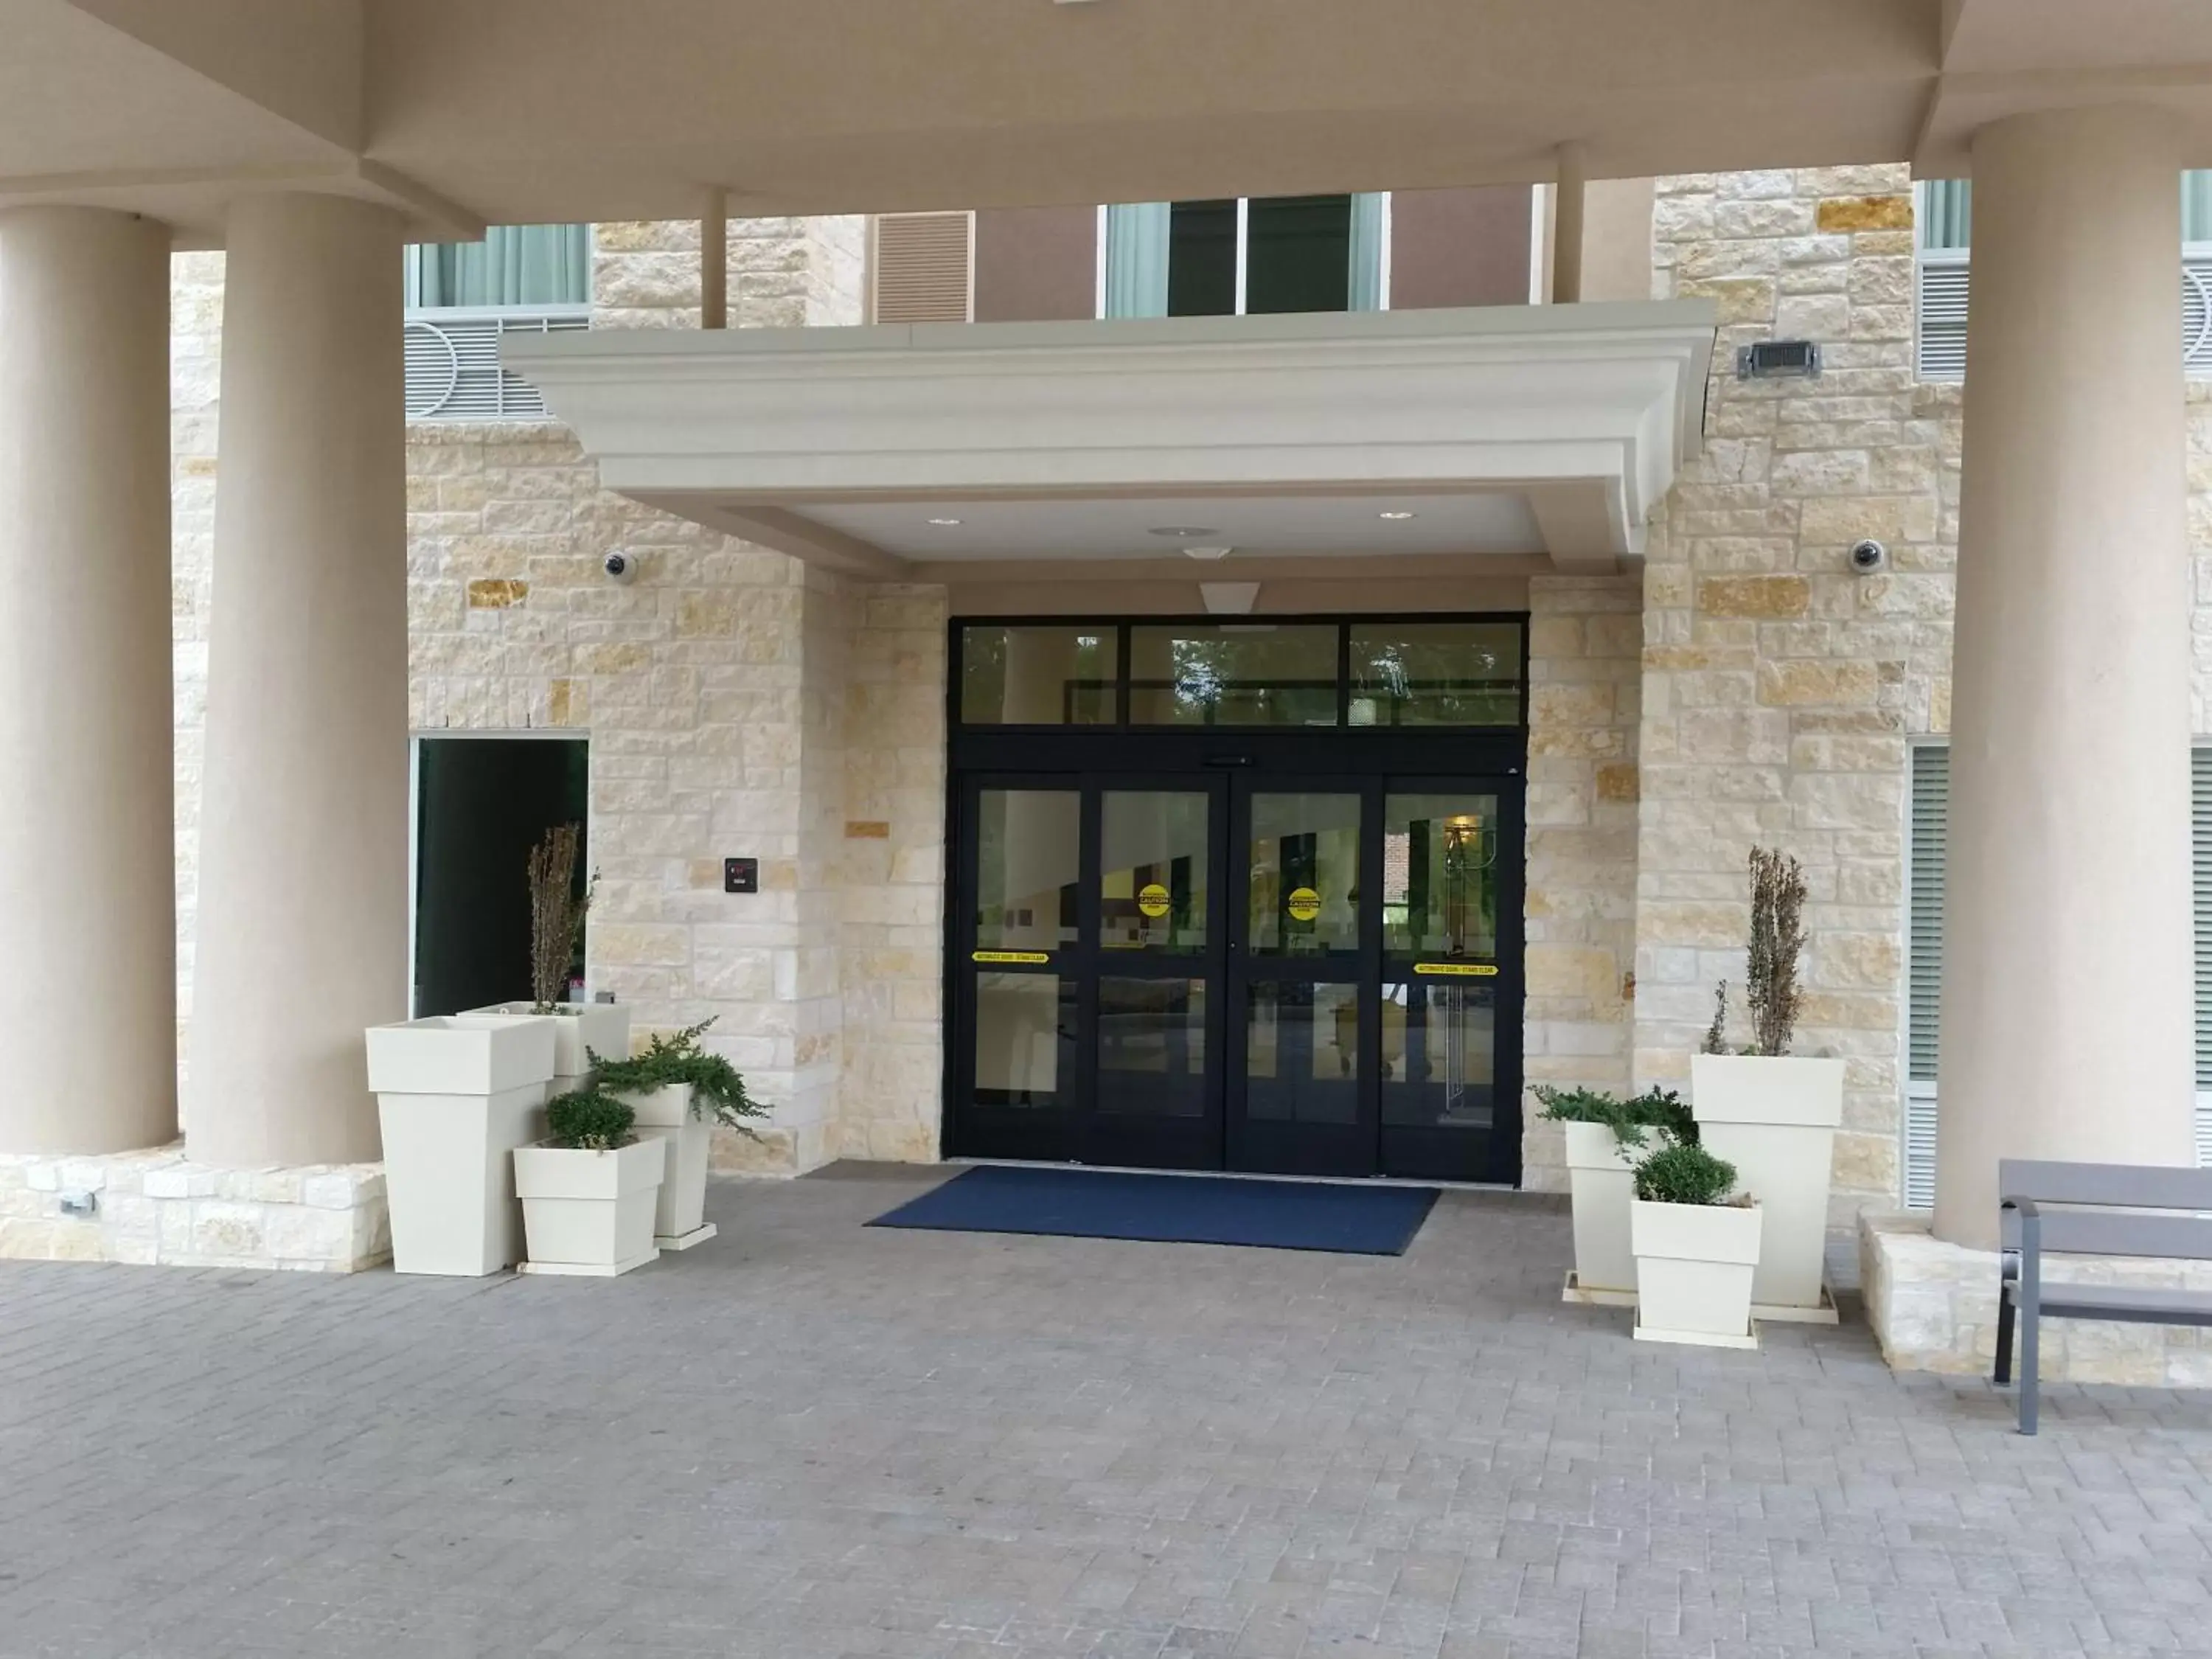 Property building in Holiday Inn Express and Suites Atascocita - Humble - Kingwood, an IHG Hotel